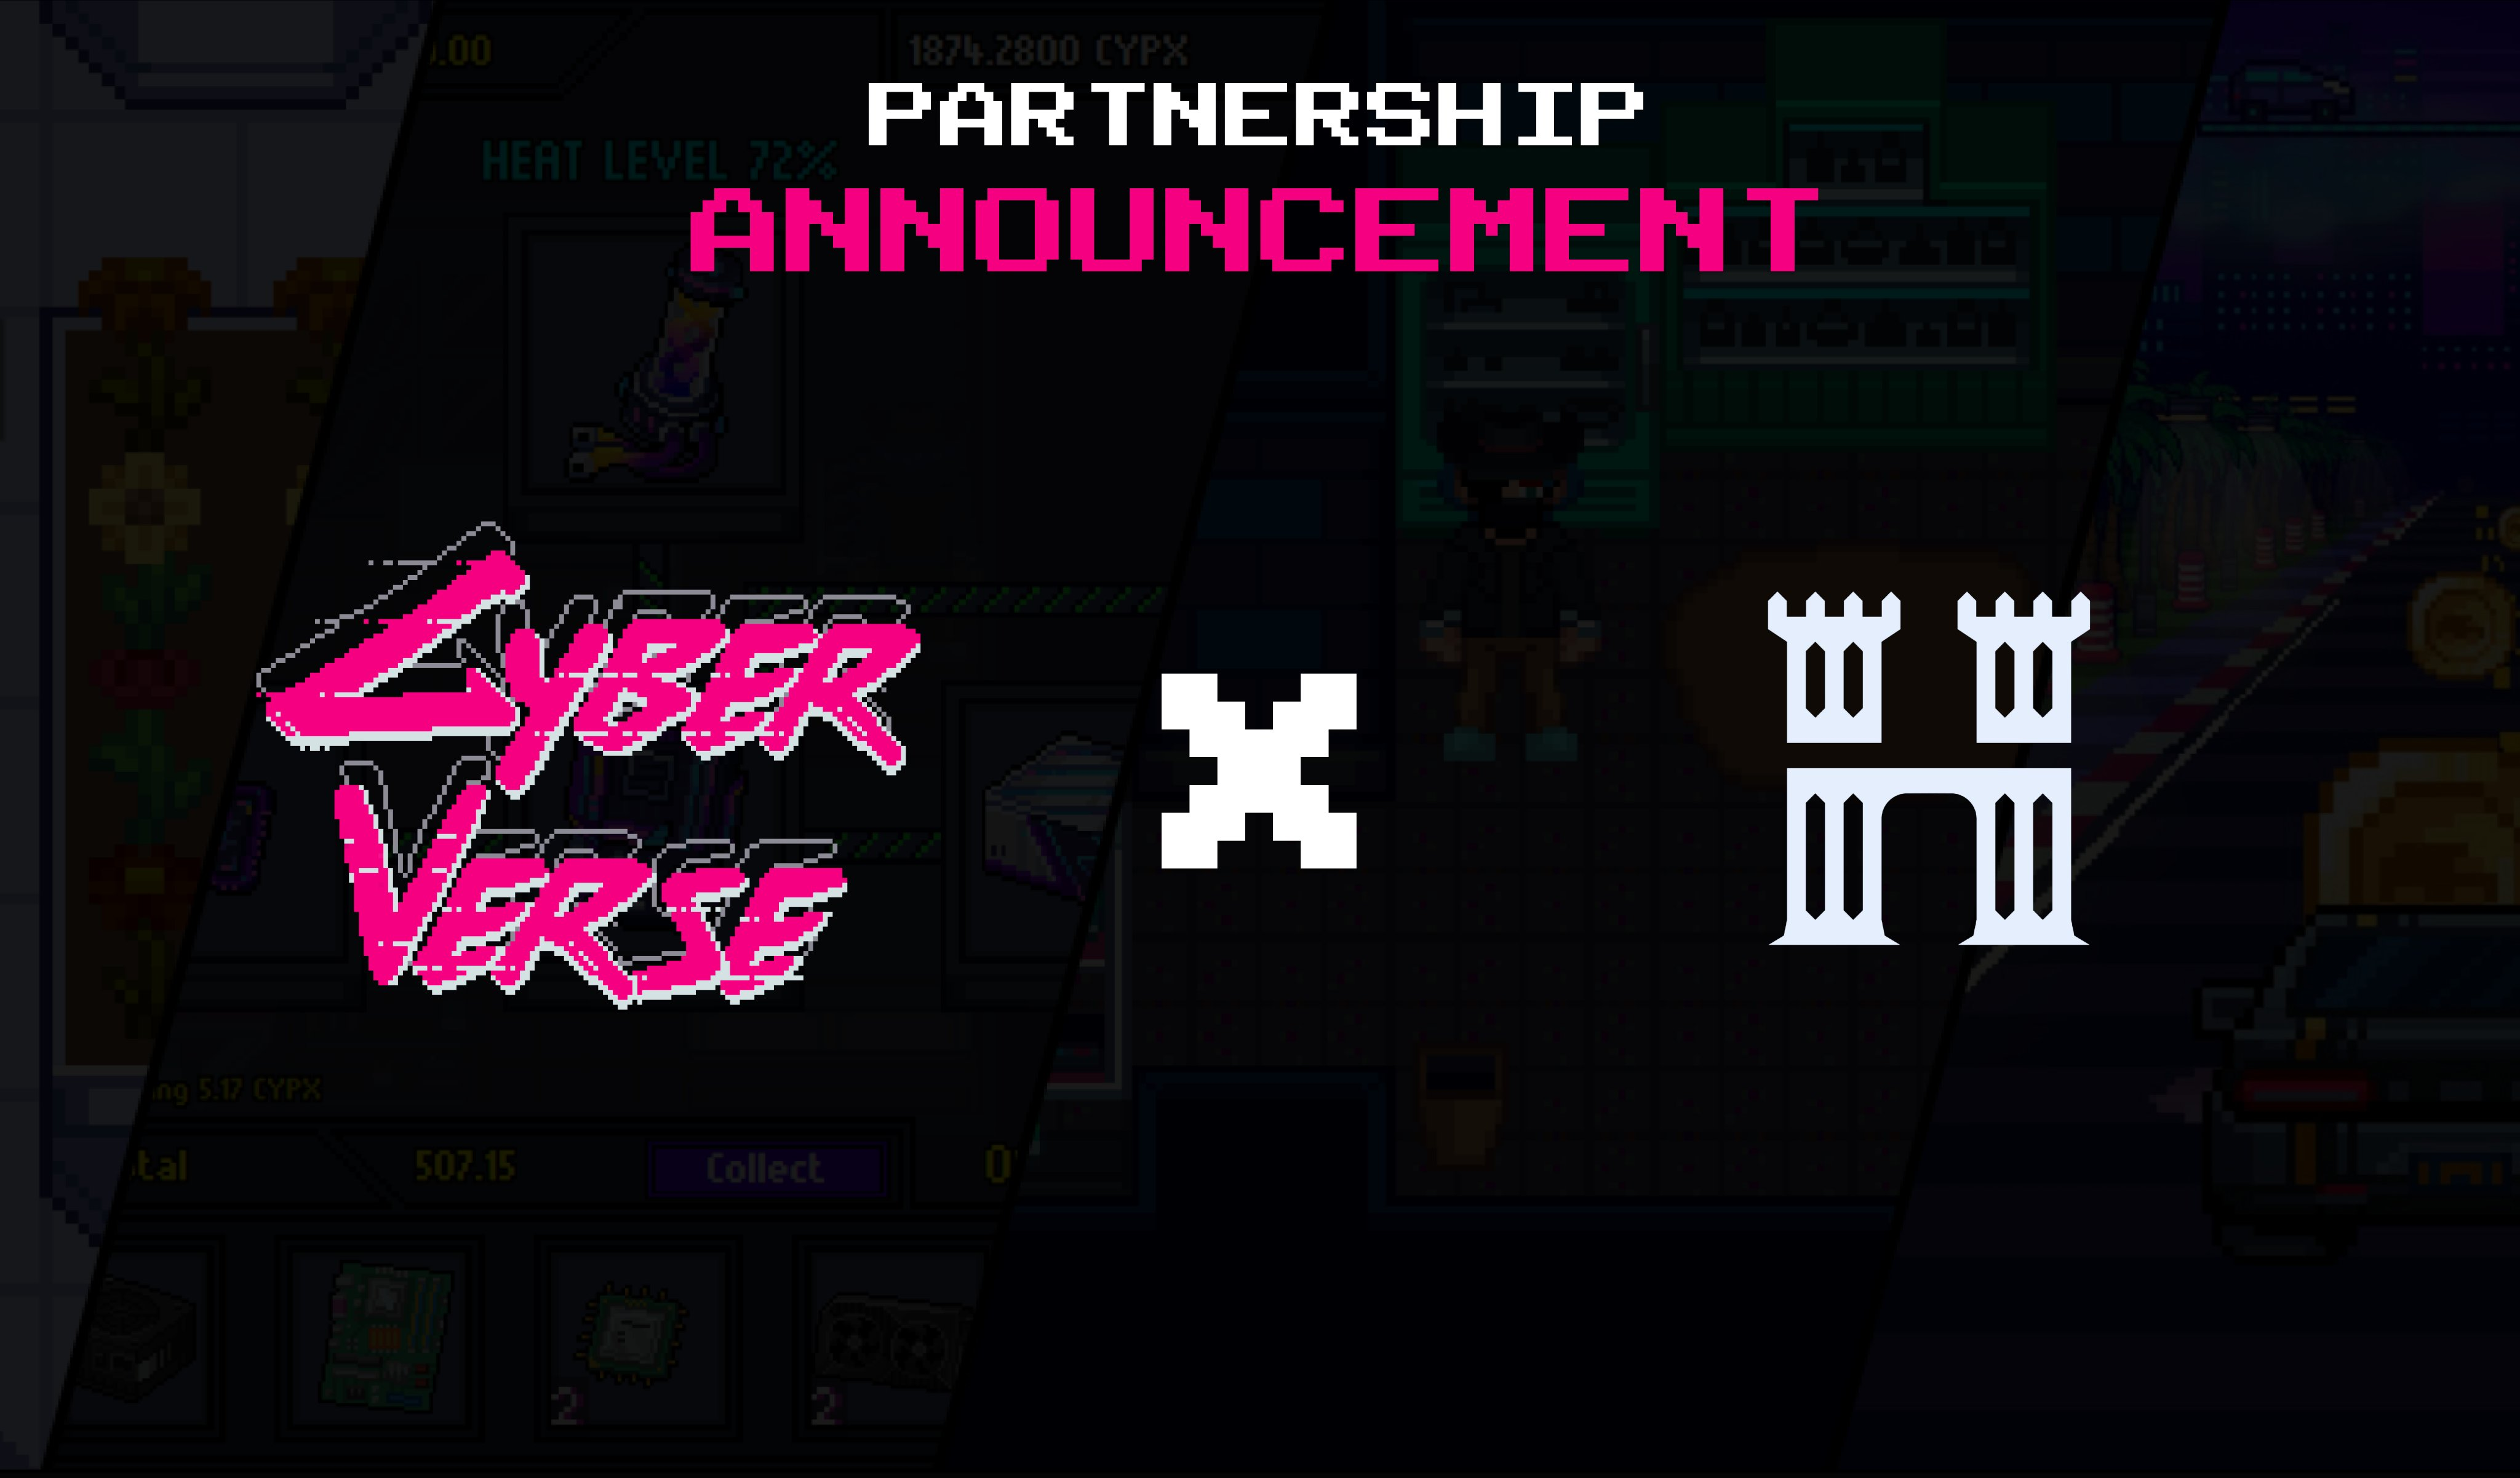 CyberVerse x House of Titans partnership announced!